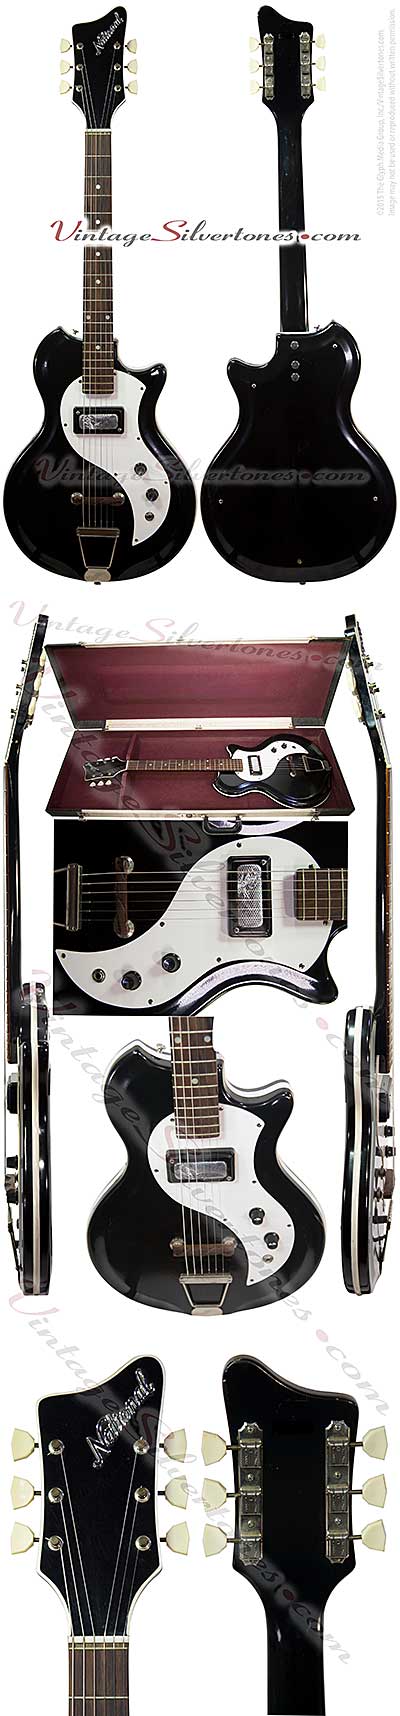 National Varsity 66 N466- semi-hollow body electric guitar 1 pickup, made in Chicago 1964 res-o-glass